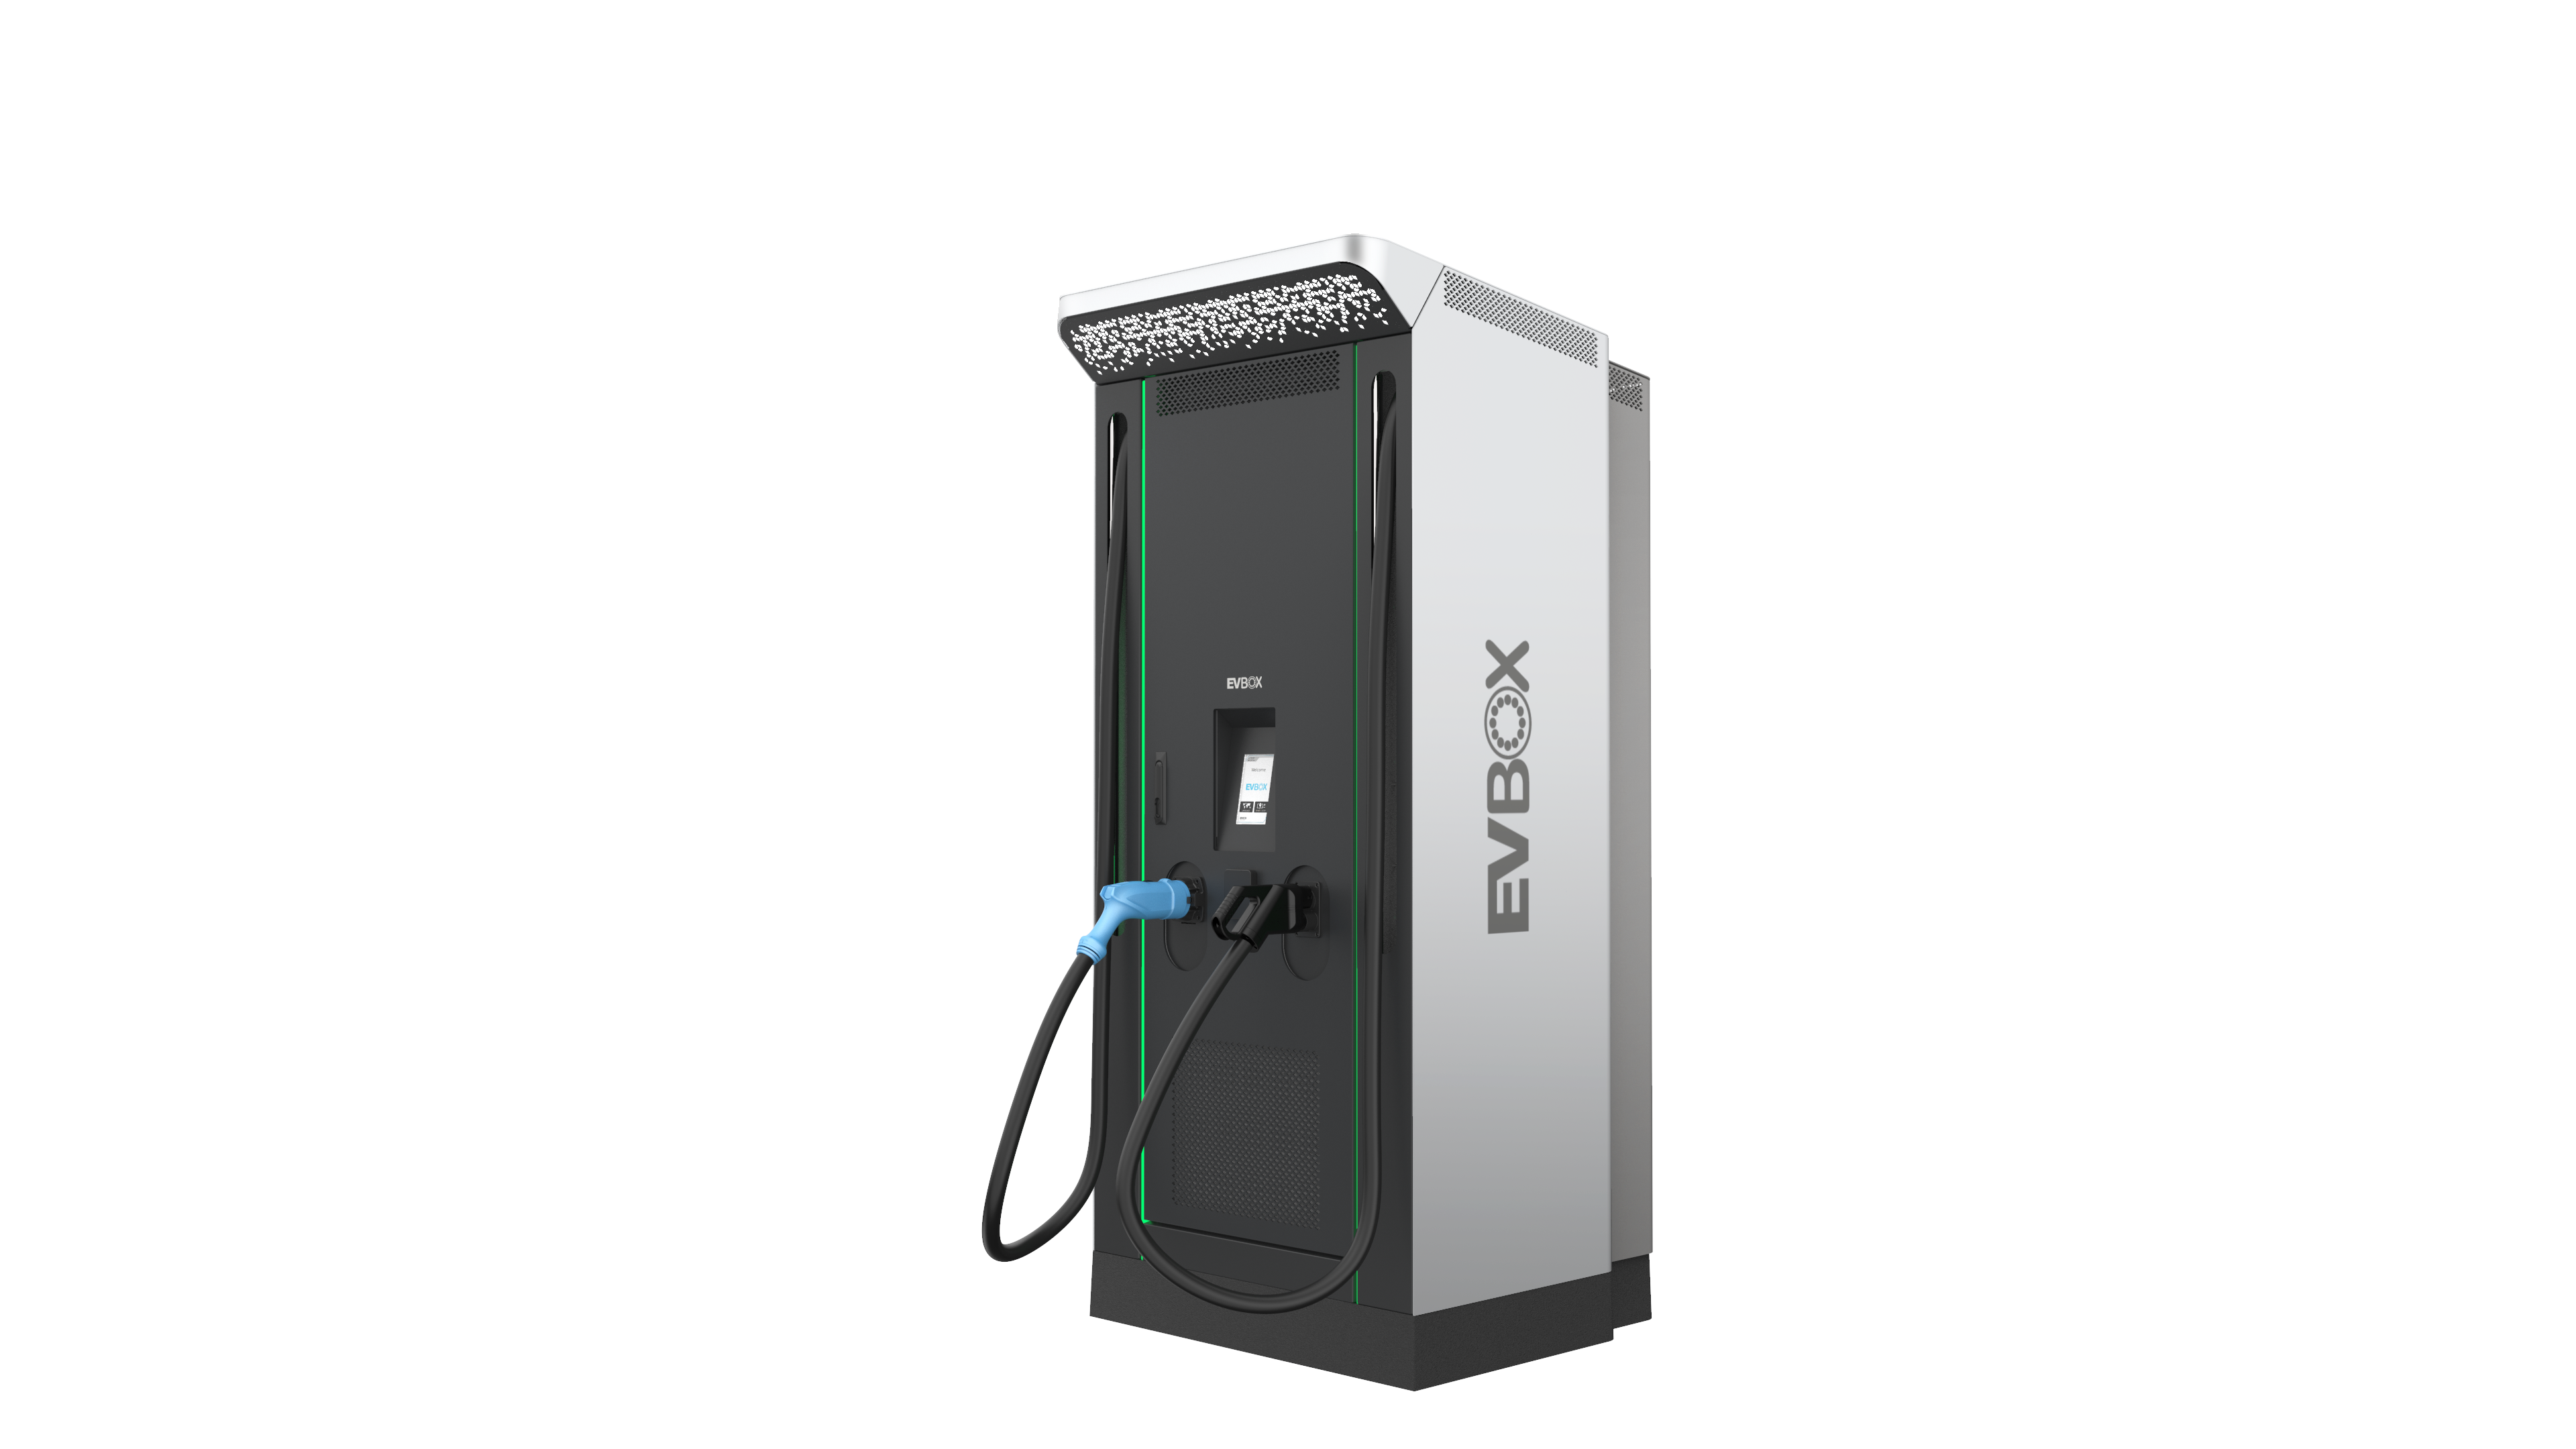 MUSE Design Winners - The first 100 kW fast charging station for EVs that focuses on driver experience